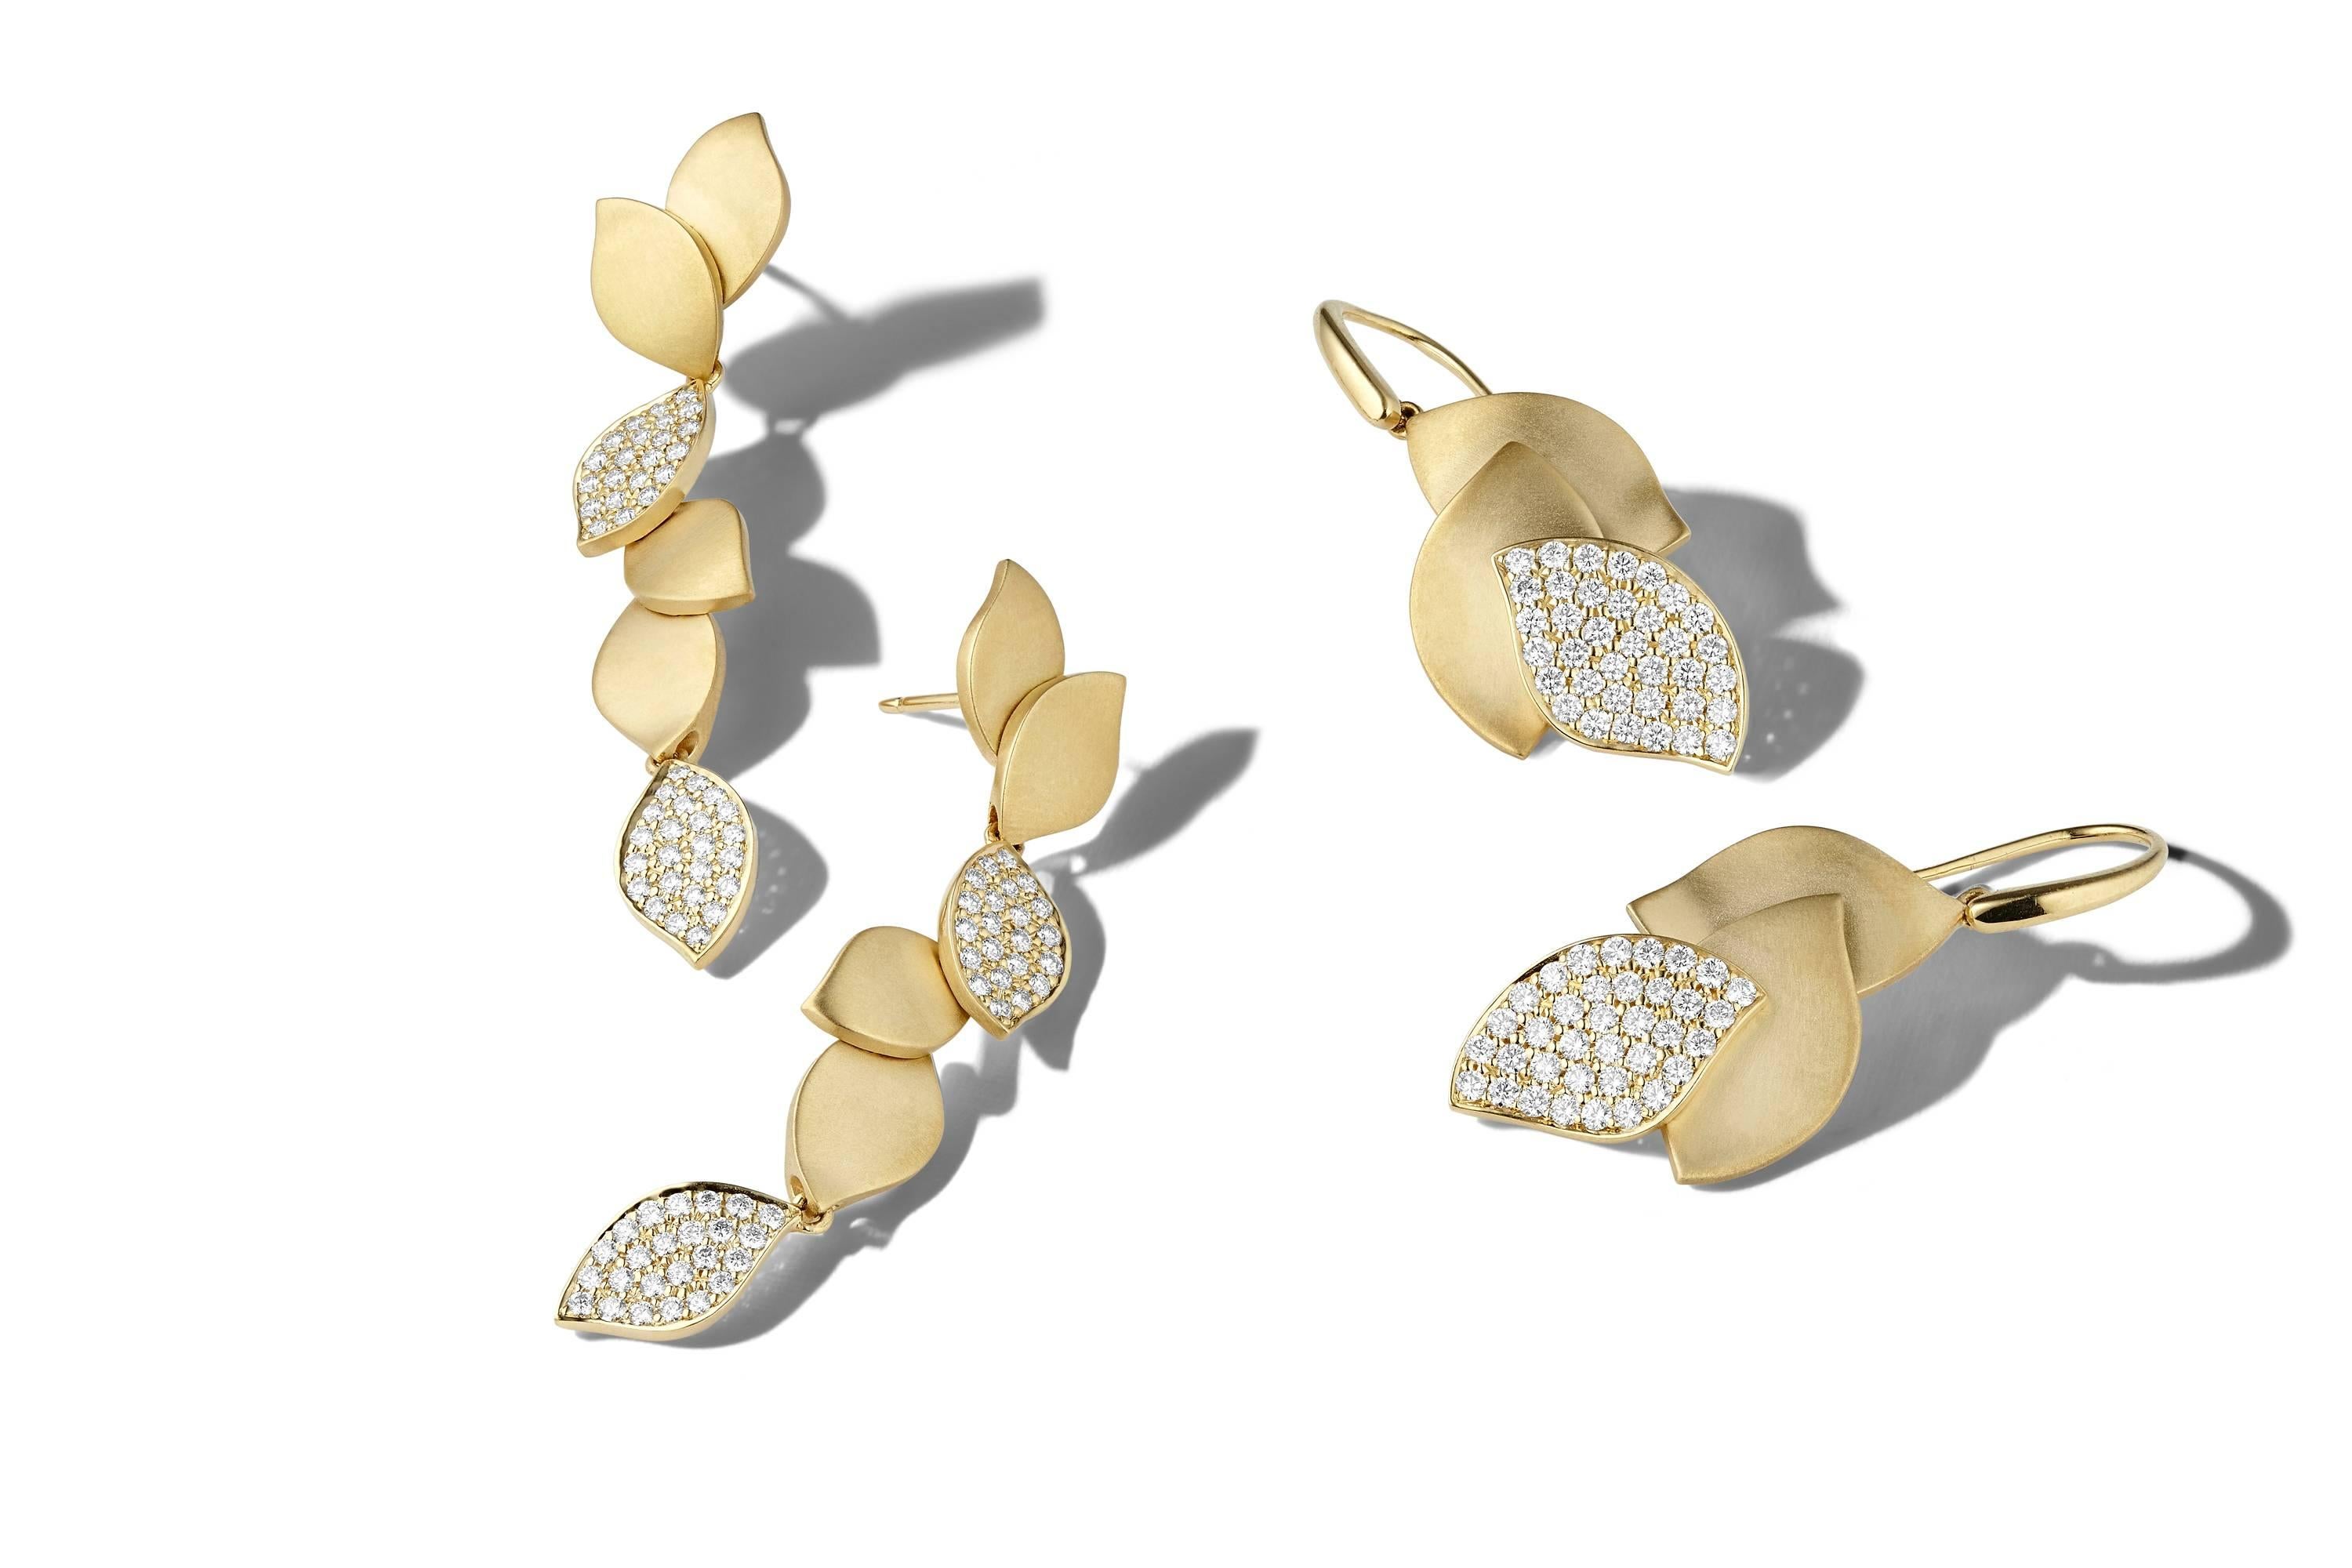 Cascading layers of 18 karat yellow gold leaves accented by 1.00 total carat of dazzling GH-VS round pave diamonds capture the alluring movement of nature to form these glamorous, undeniably unique earrings.  Stunning design allows the leaves to